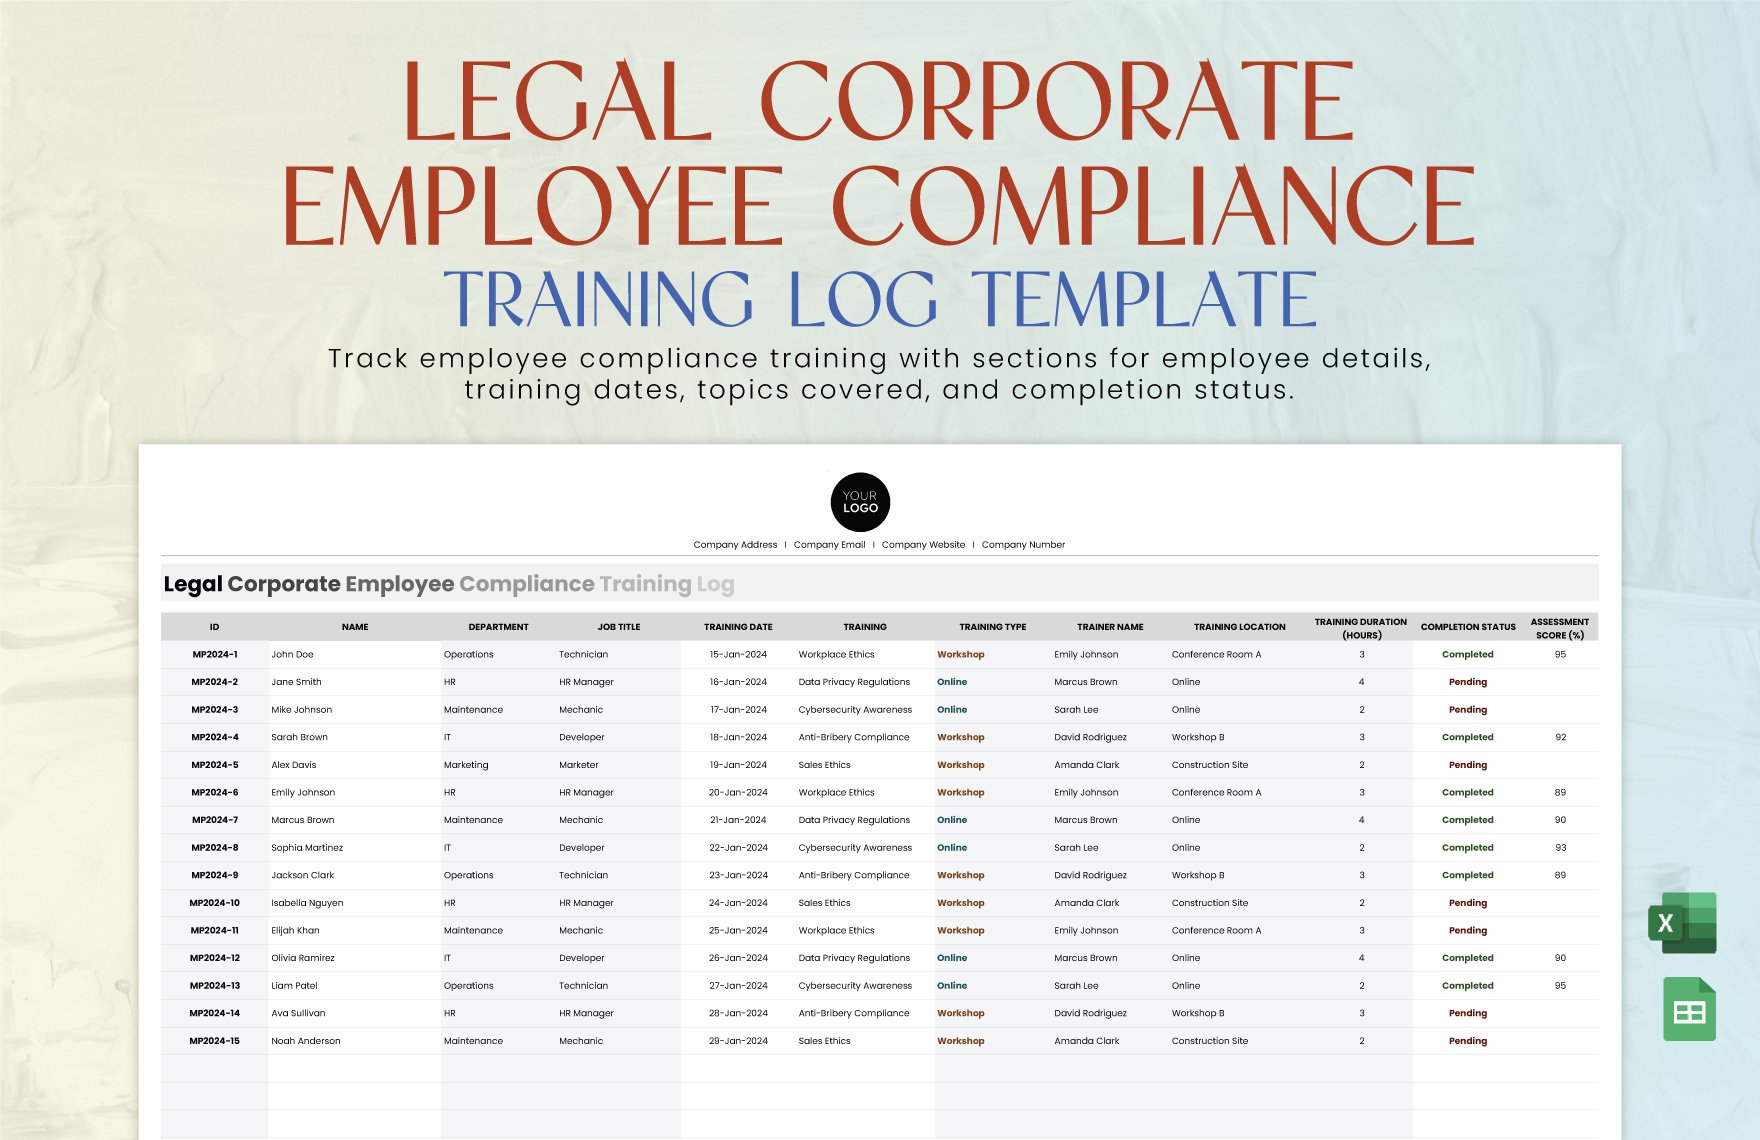 Legal Corporate Employee Compliance Training Log Template in Excel, Google Sheets